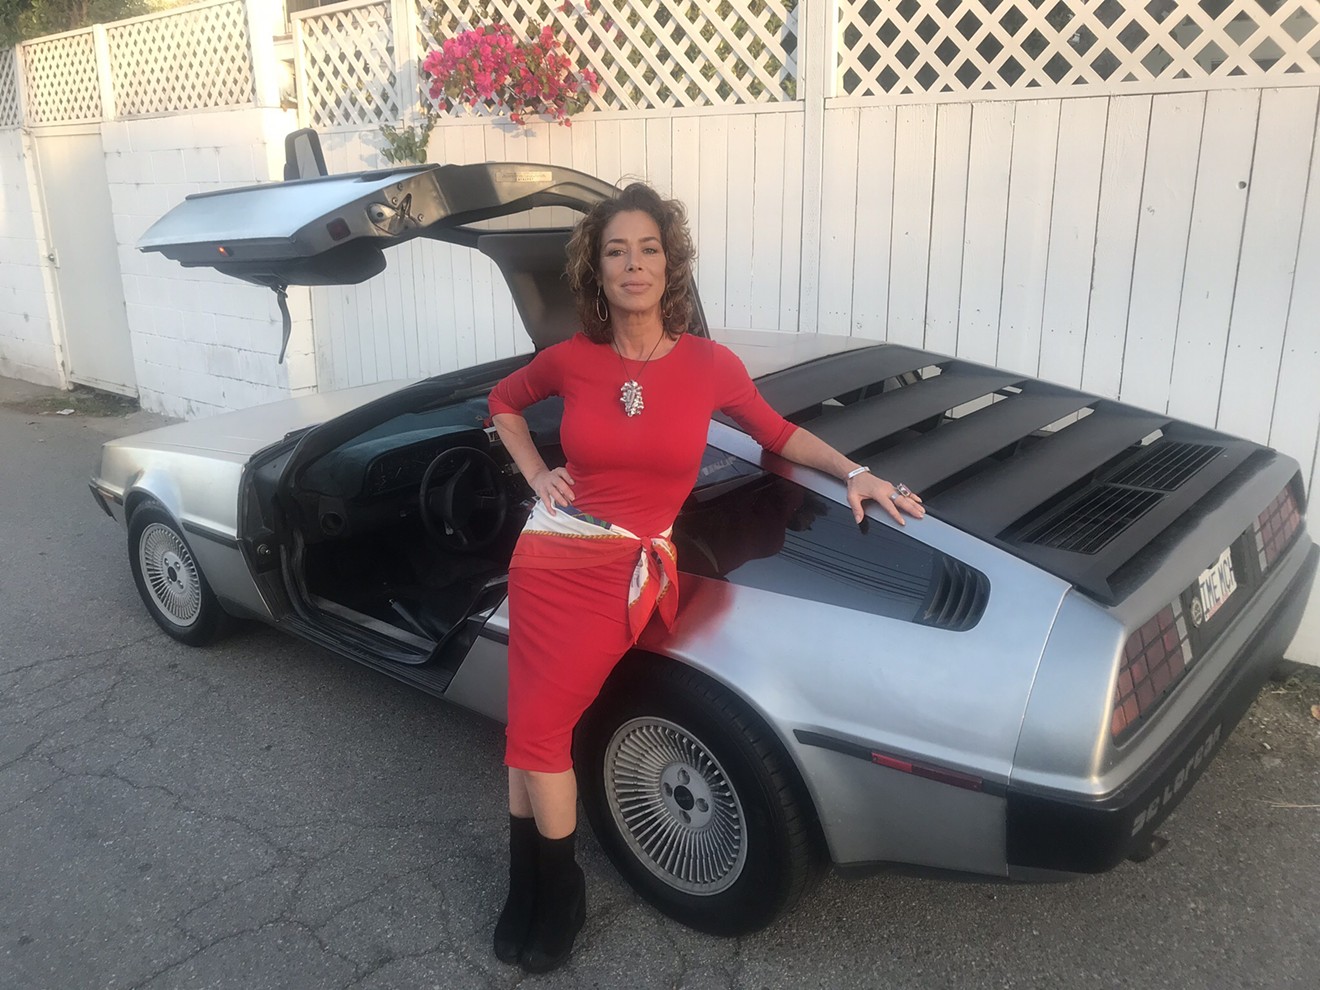 Actress Claudia Wells with the iconic Delorean sports car, the stainless steel behemoth that Doc Brown turns into a time machine in the 1985 comedy Back to the Future in which Wells played Marty McFly's girlfriend Jennifer Parker.